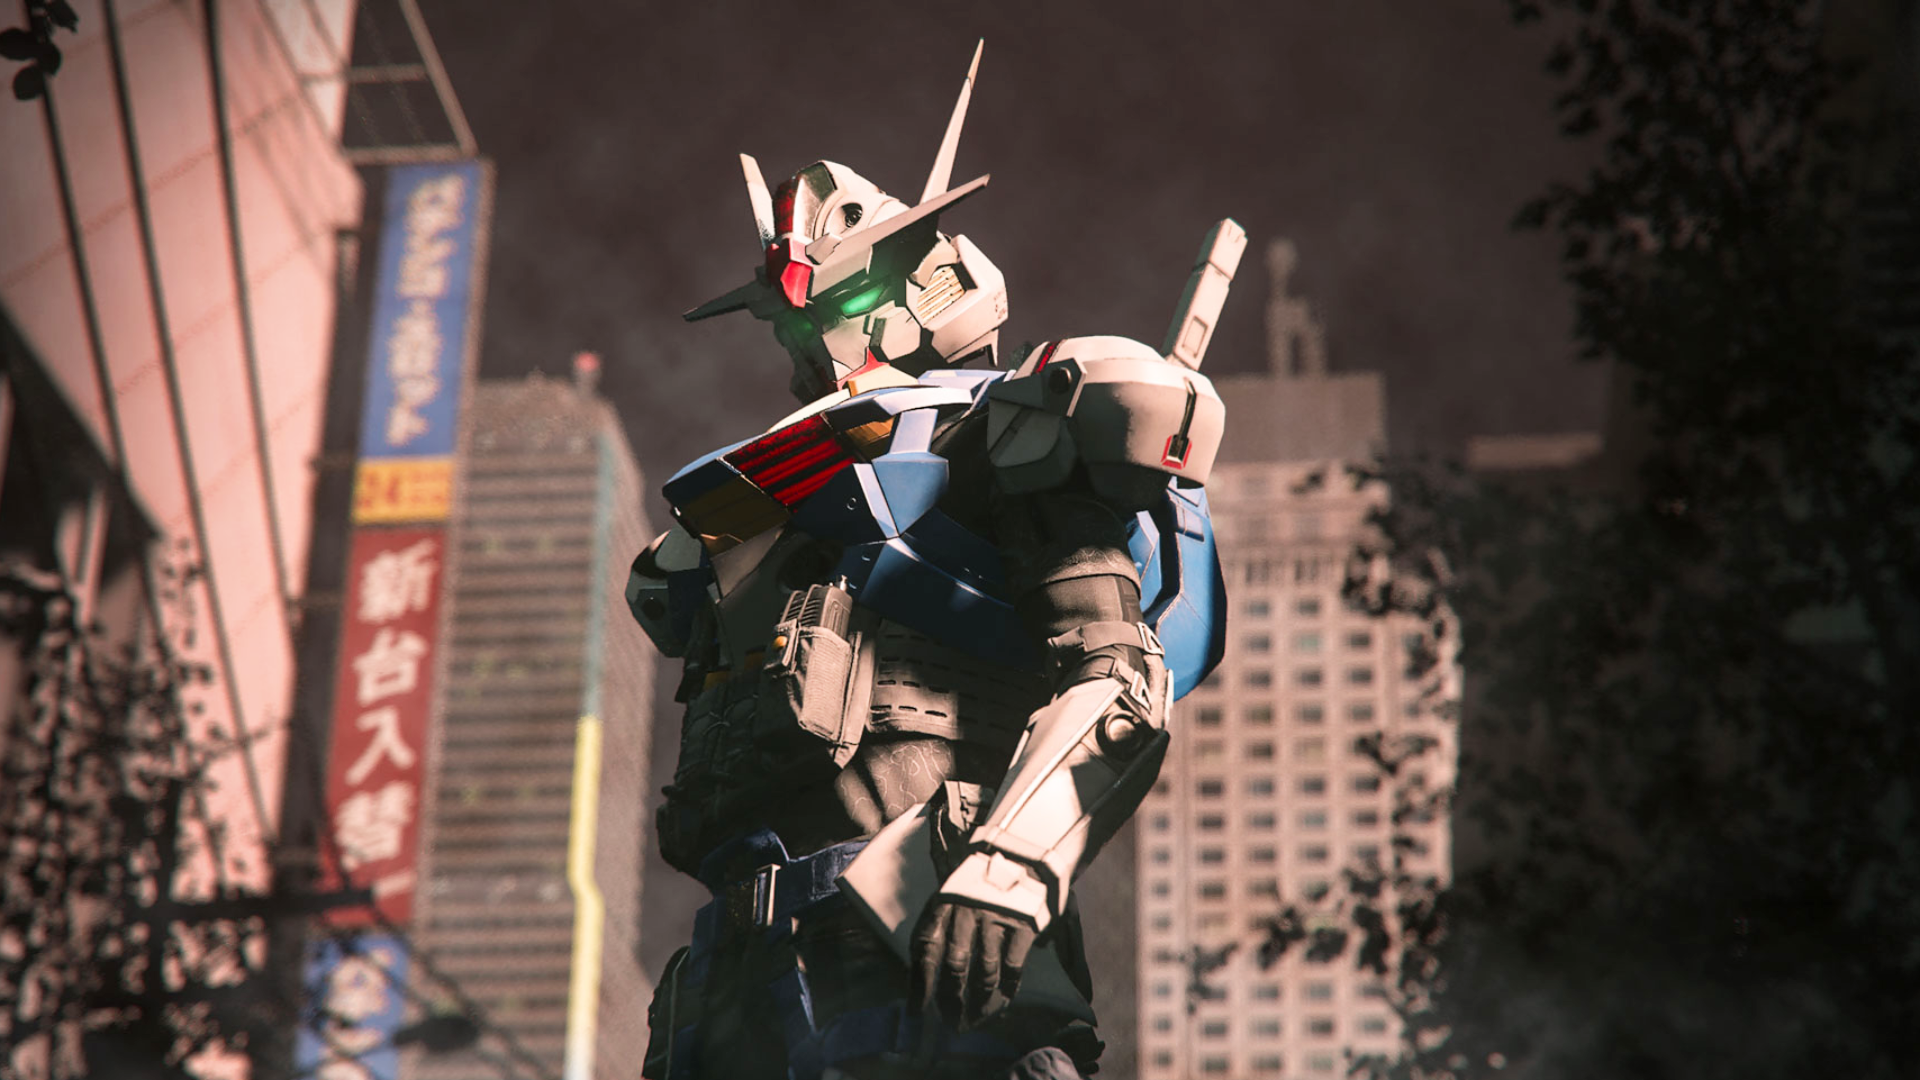 Call of Duty's Gundam crossover has fans frothing at the mouth, but looks aren't everything